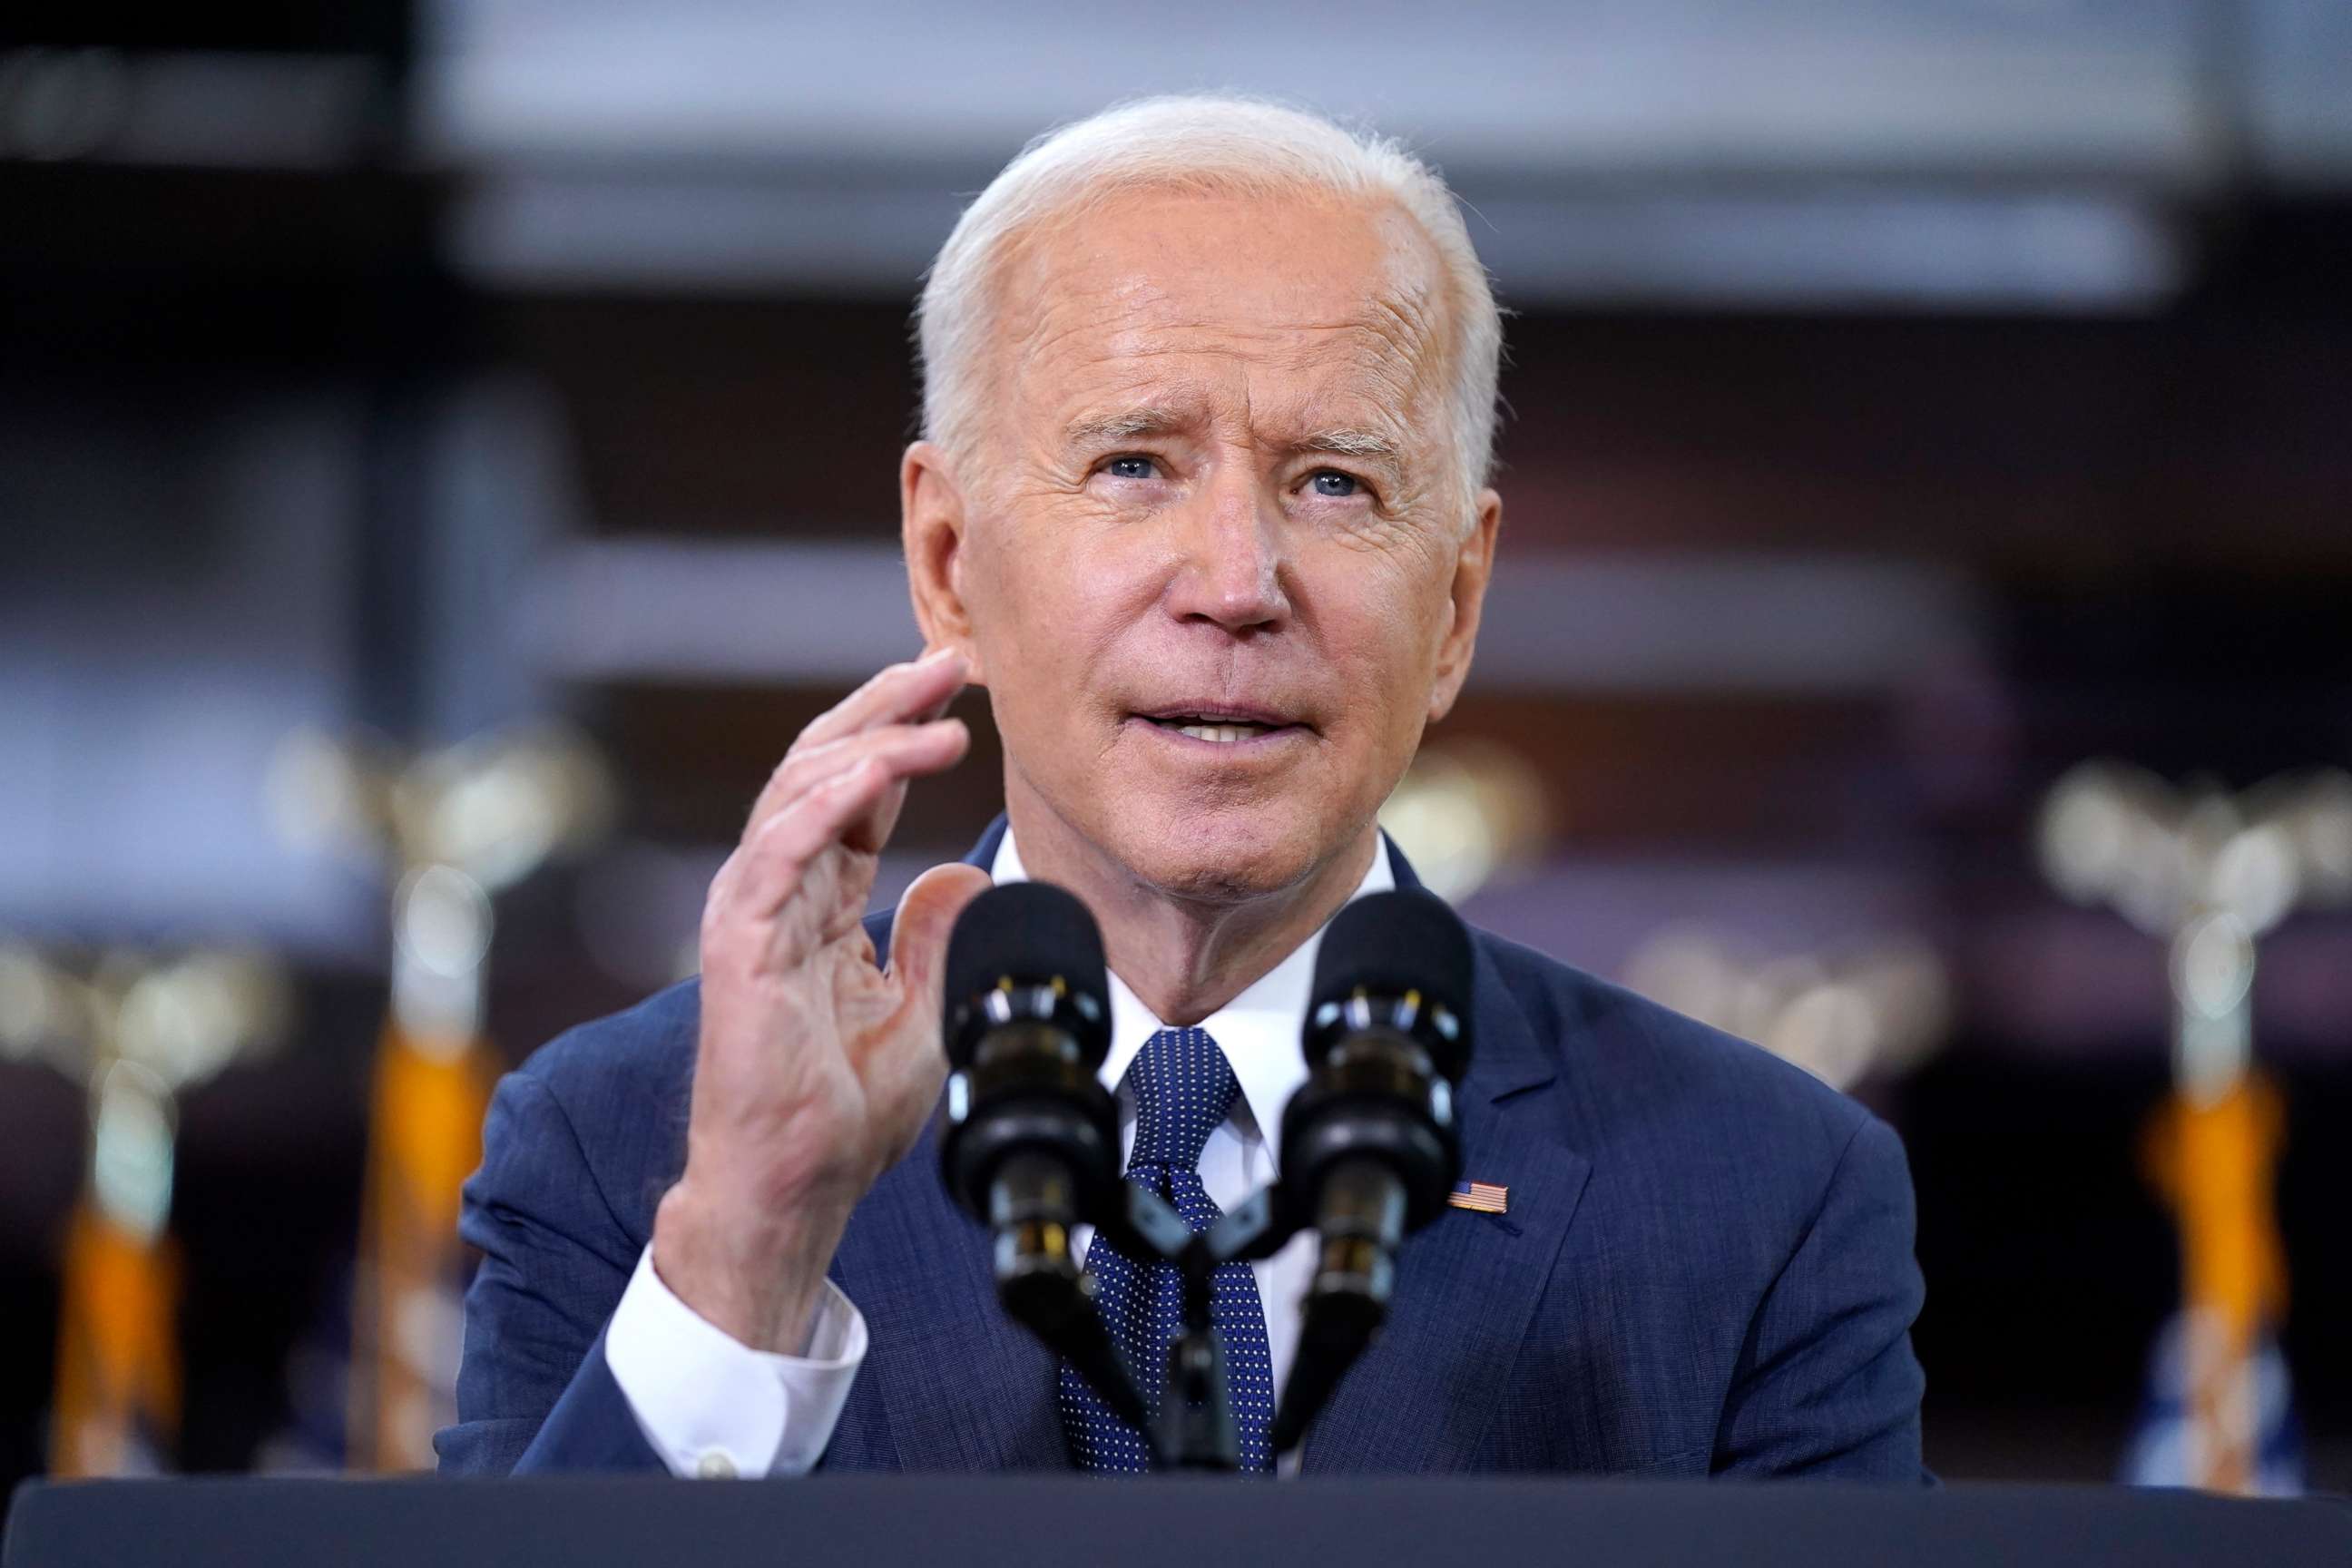 PHOTO: President Joe Biden delivers a speech on infrastructure spending at Carpenters Pittsburgh Training Center in Pittsburgh, March 31, 2021.